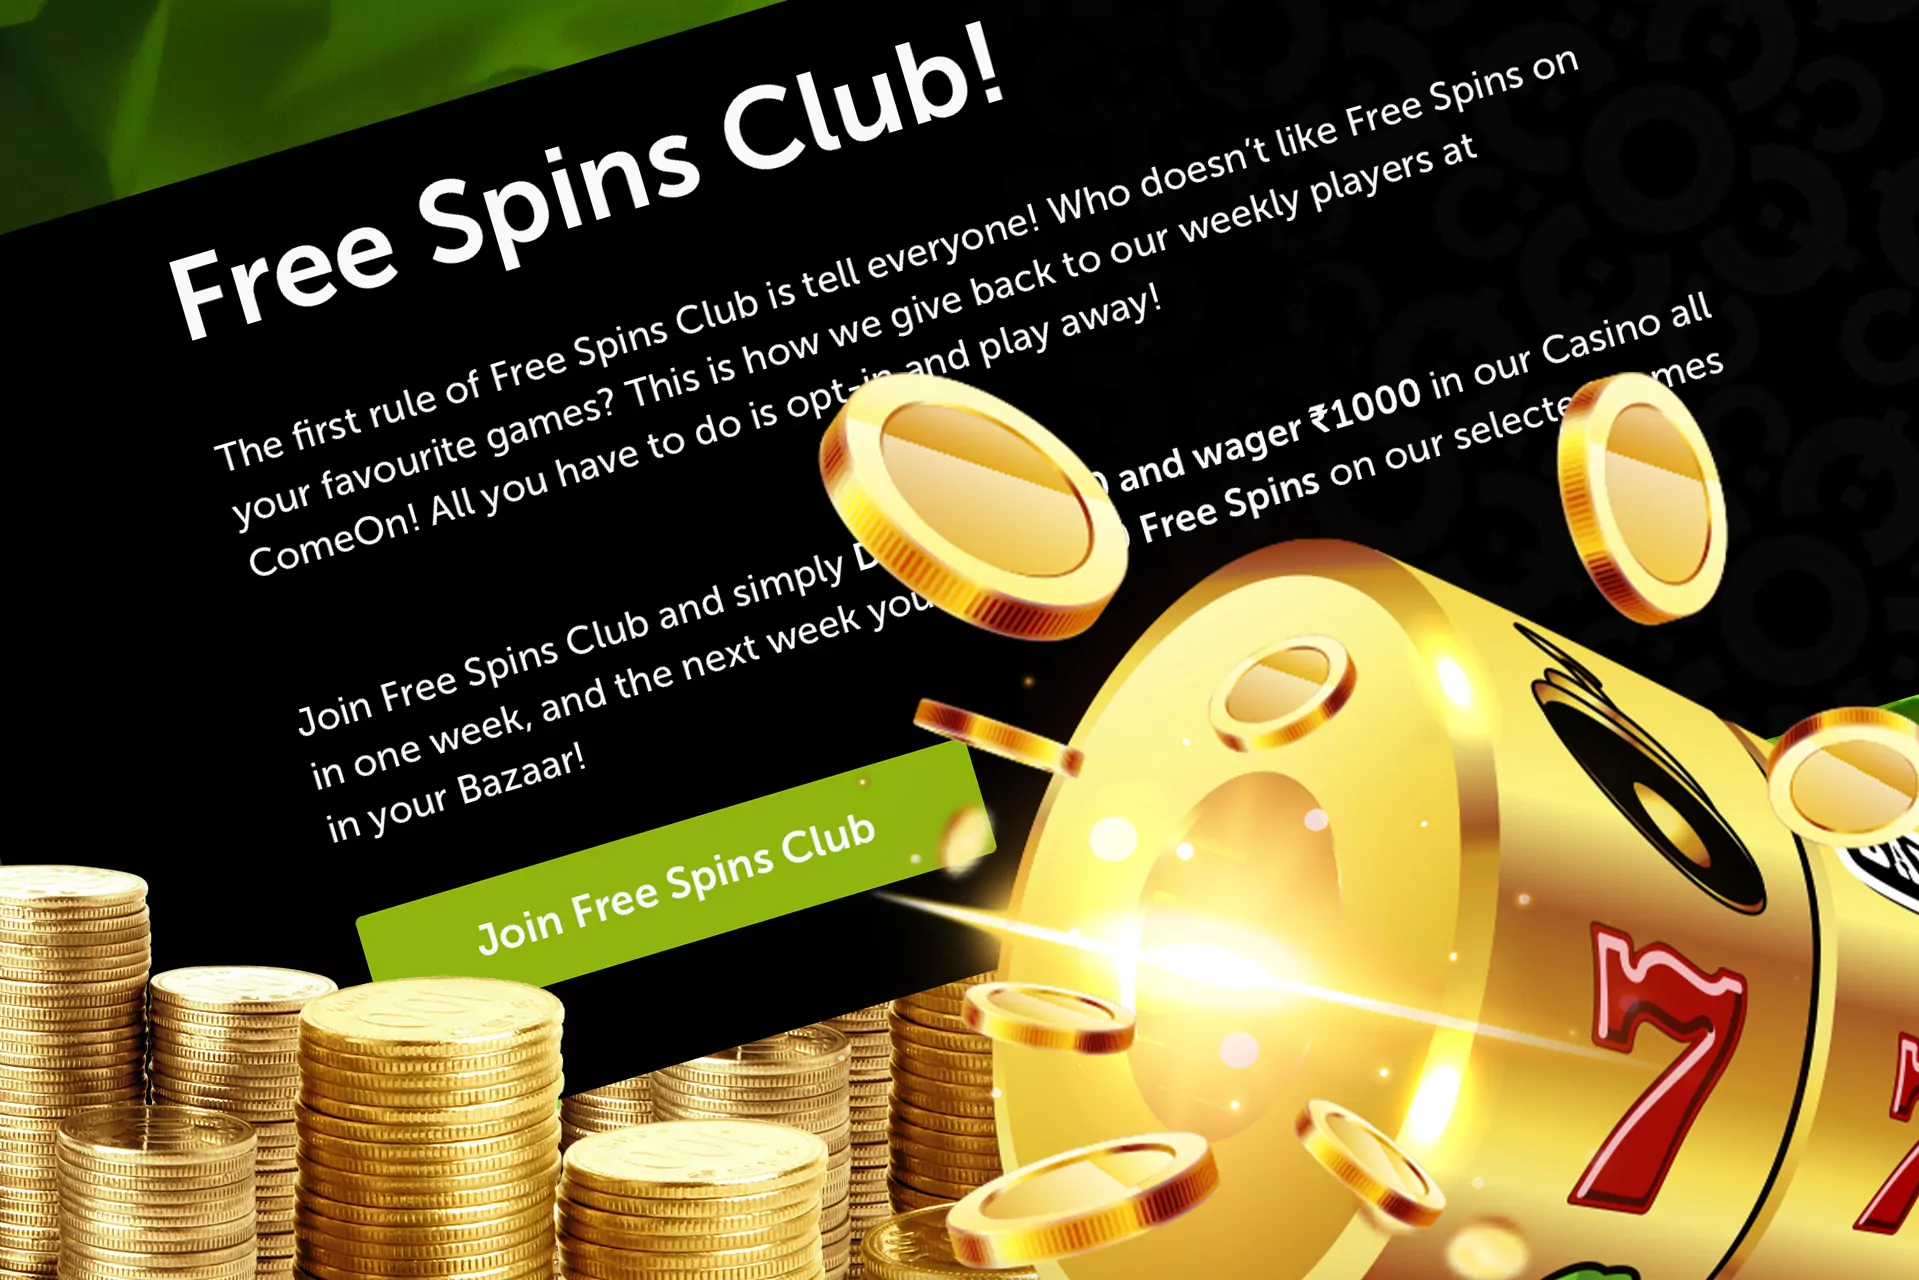 Koin the Free spins club to play casino with profit.